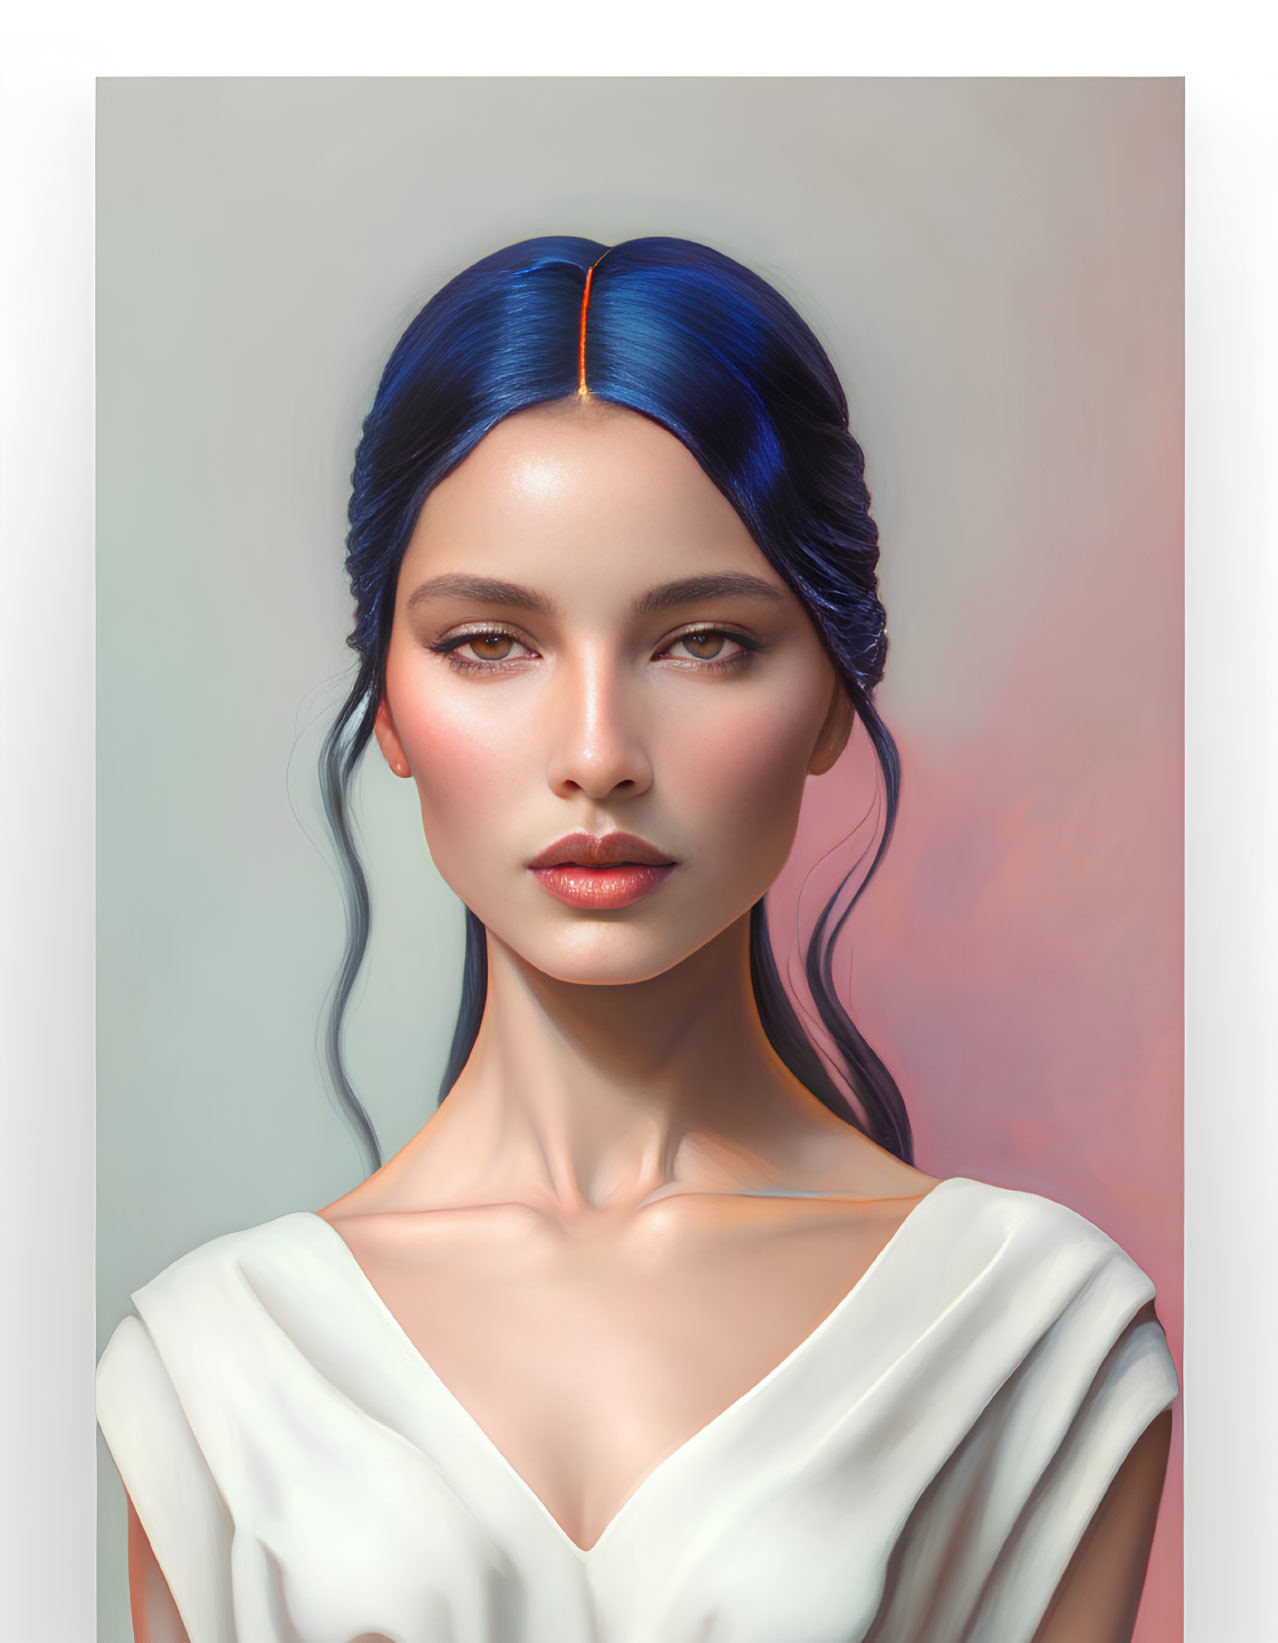 Portrait of Woman with Blue Hair and White Top in Serene Pose